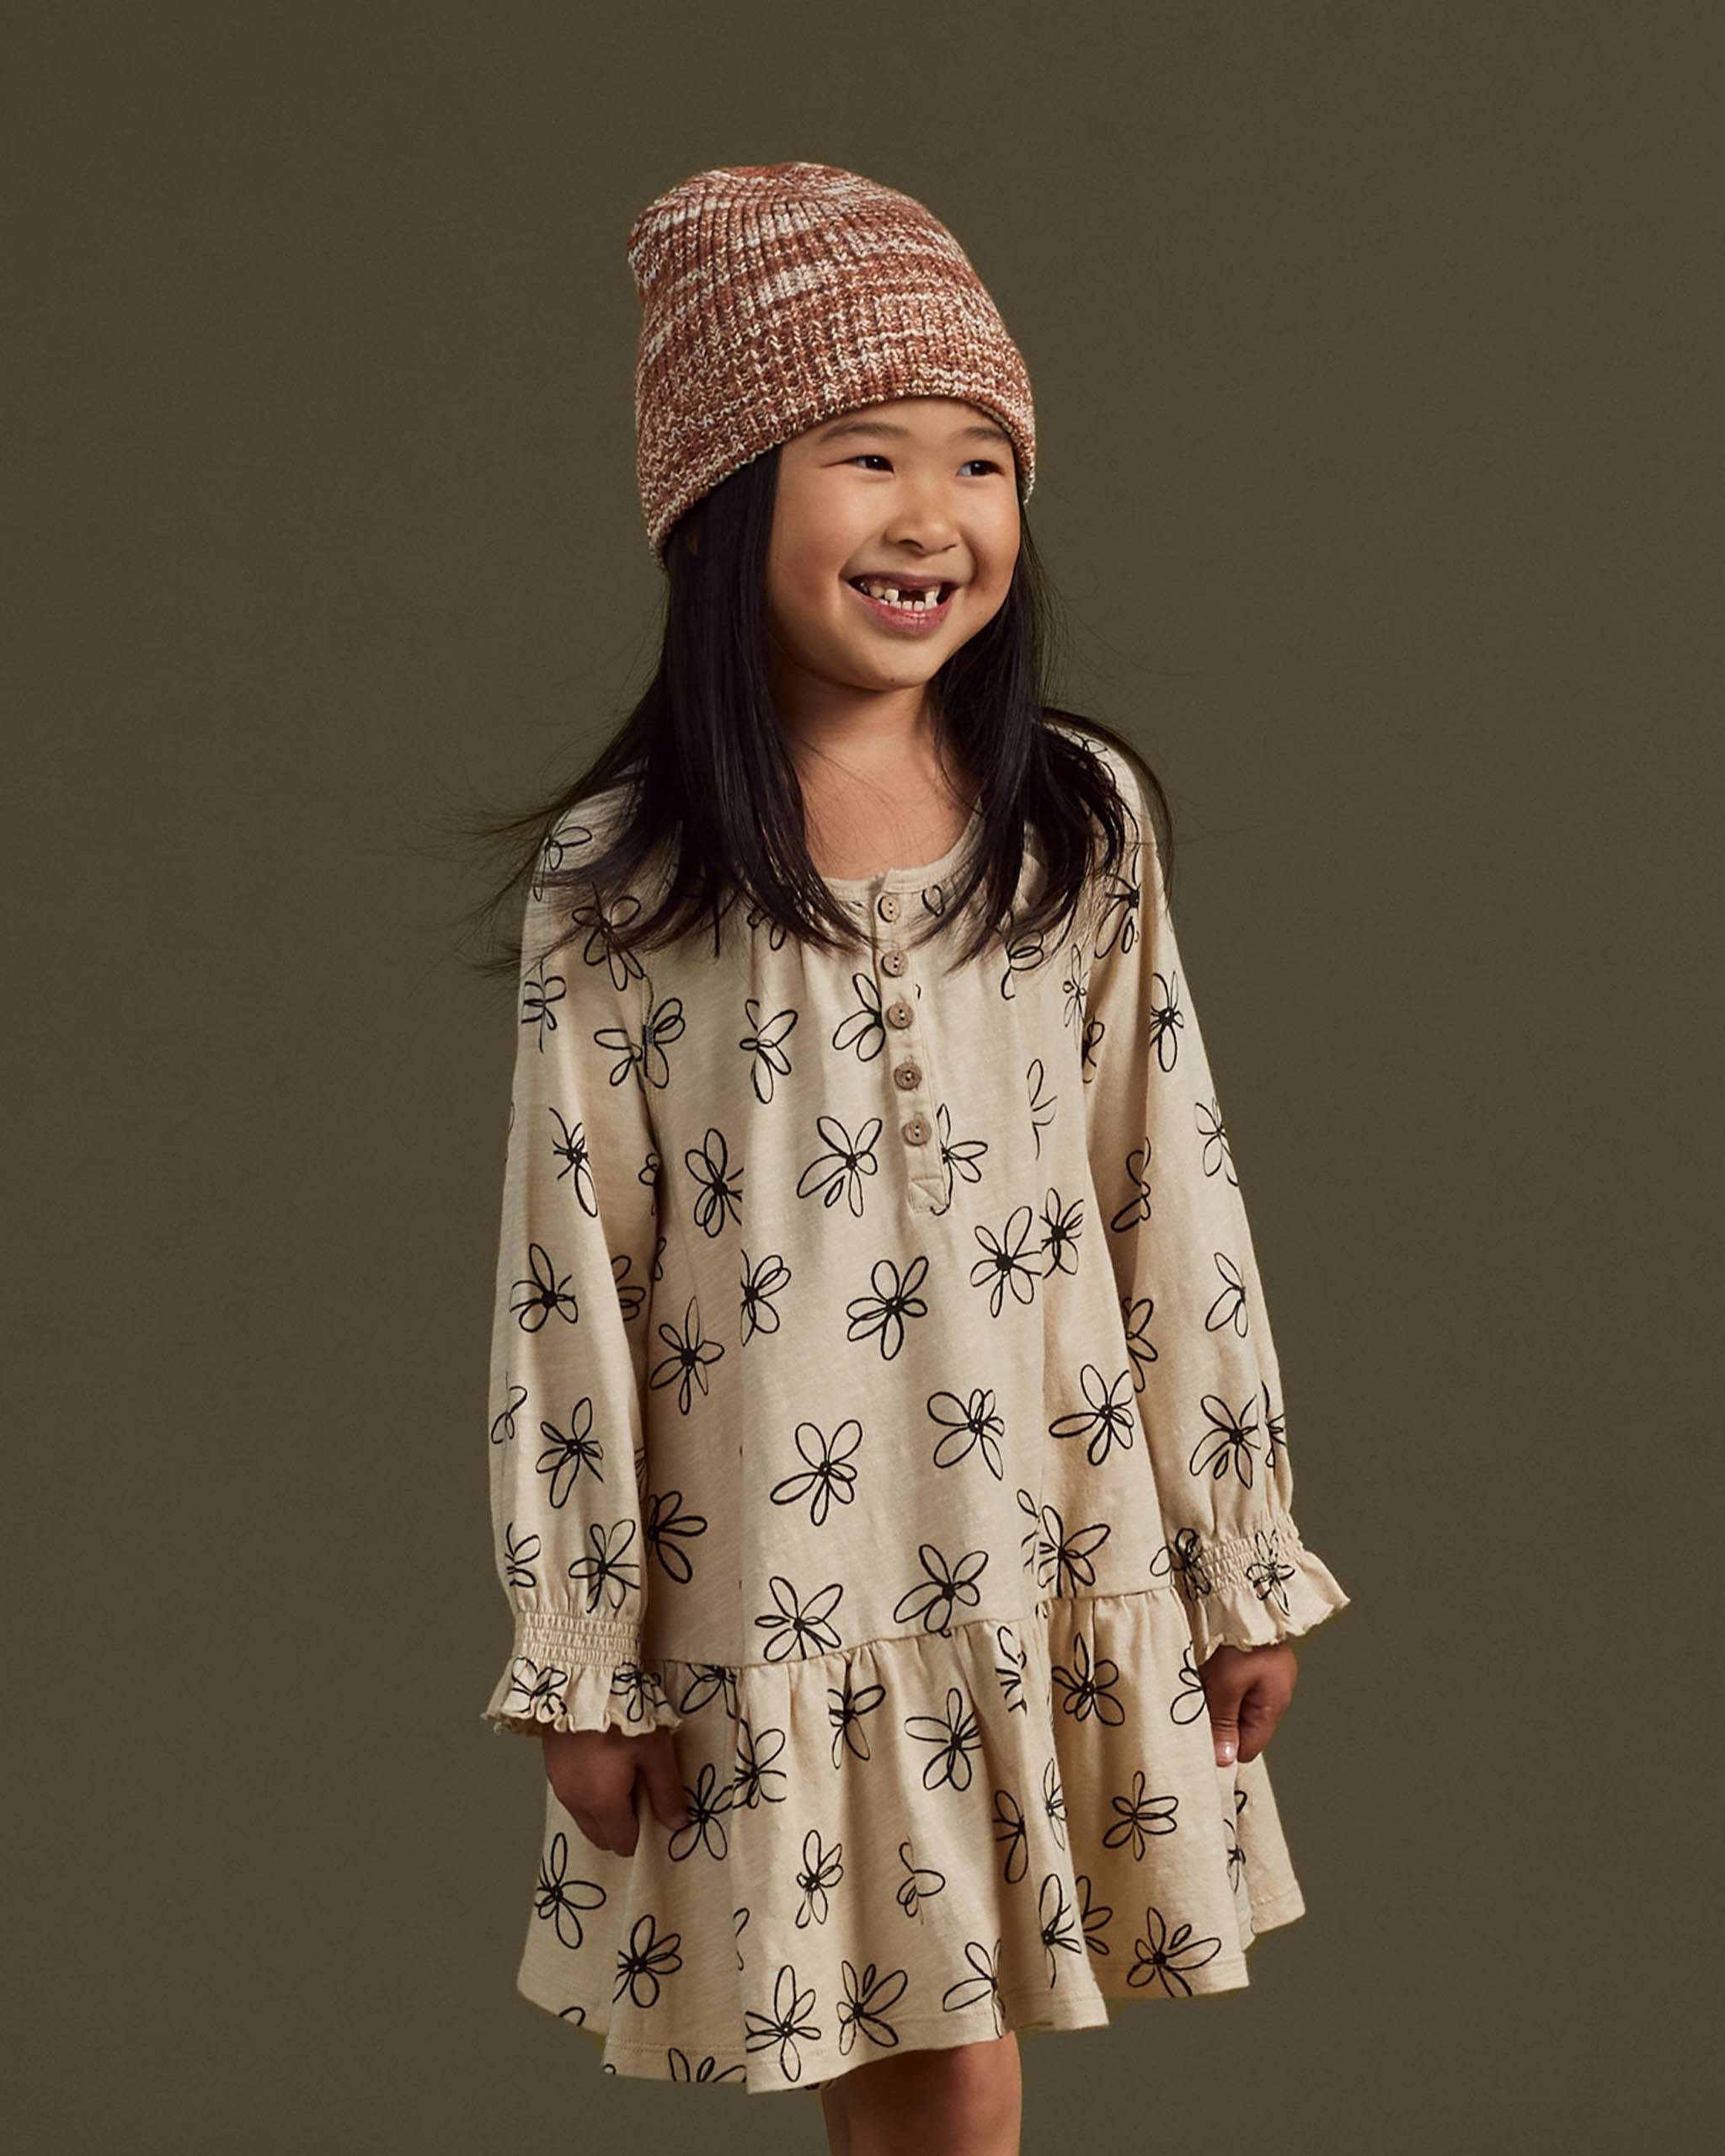 Beanie || Heathered Spice - Rylee + Cru | Kids Clothes | Trendy Baby Clothes | Modern Infant Outfits |